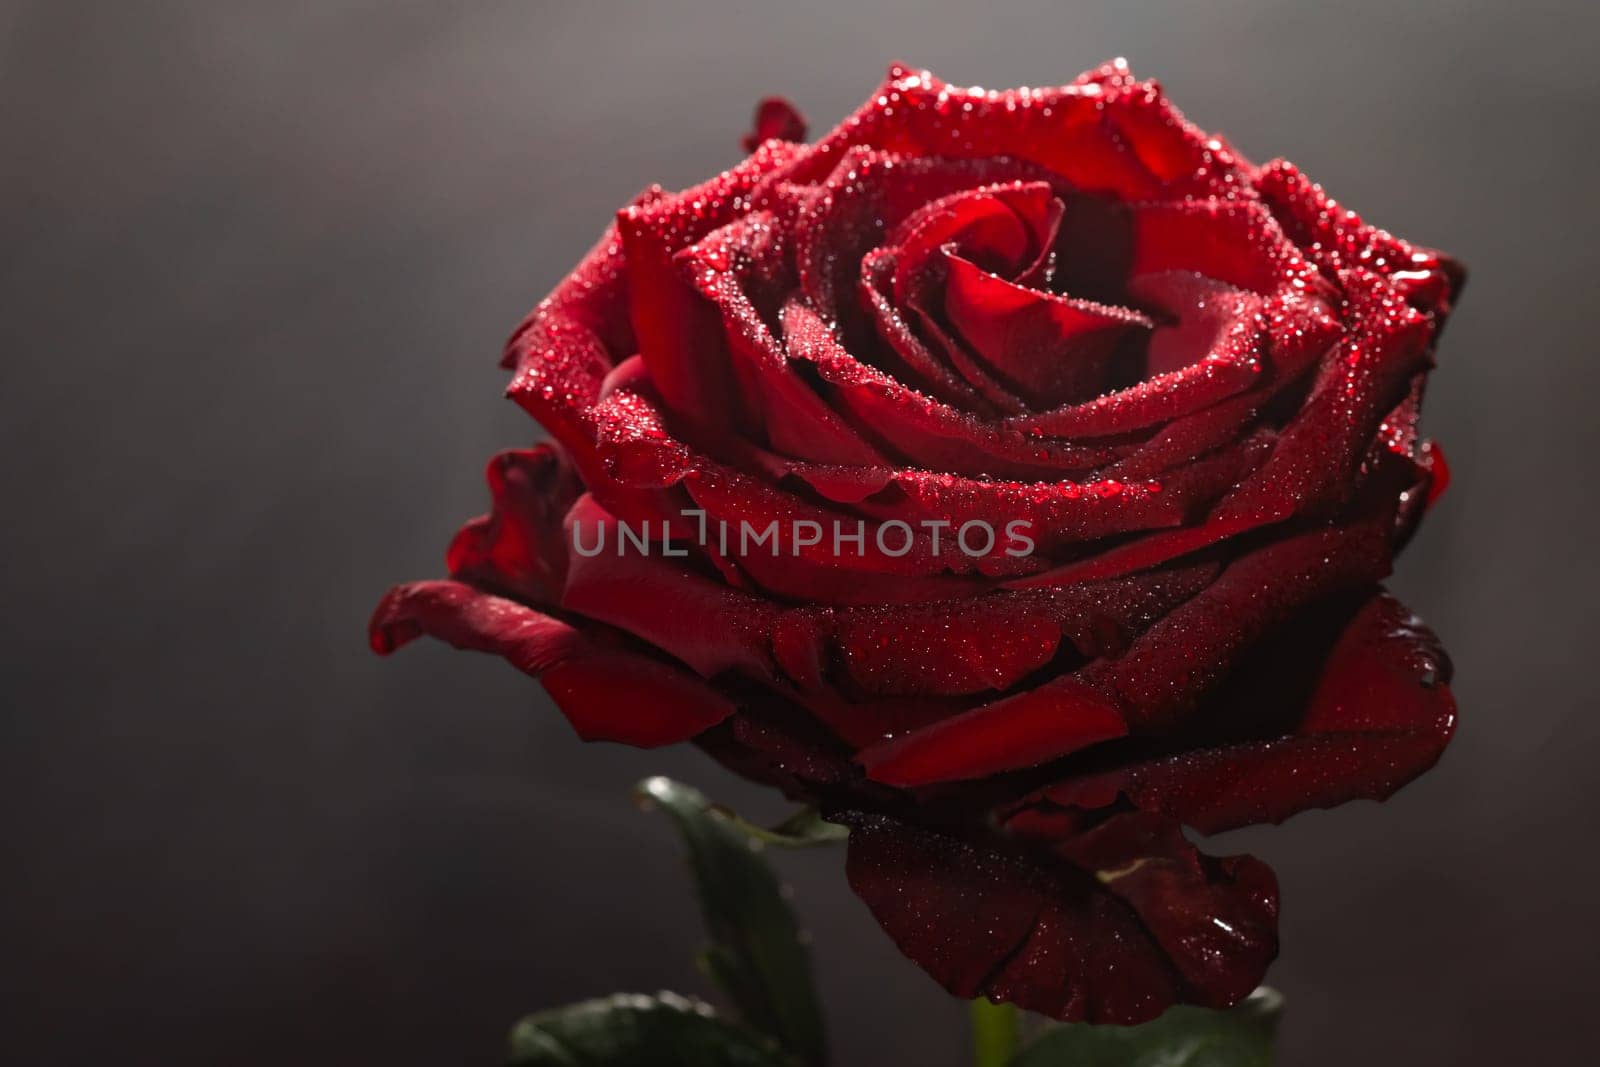 Blooming red rose bud in water drops and mist close-up on a black background, use as background, wallpaper, greeting card